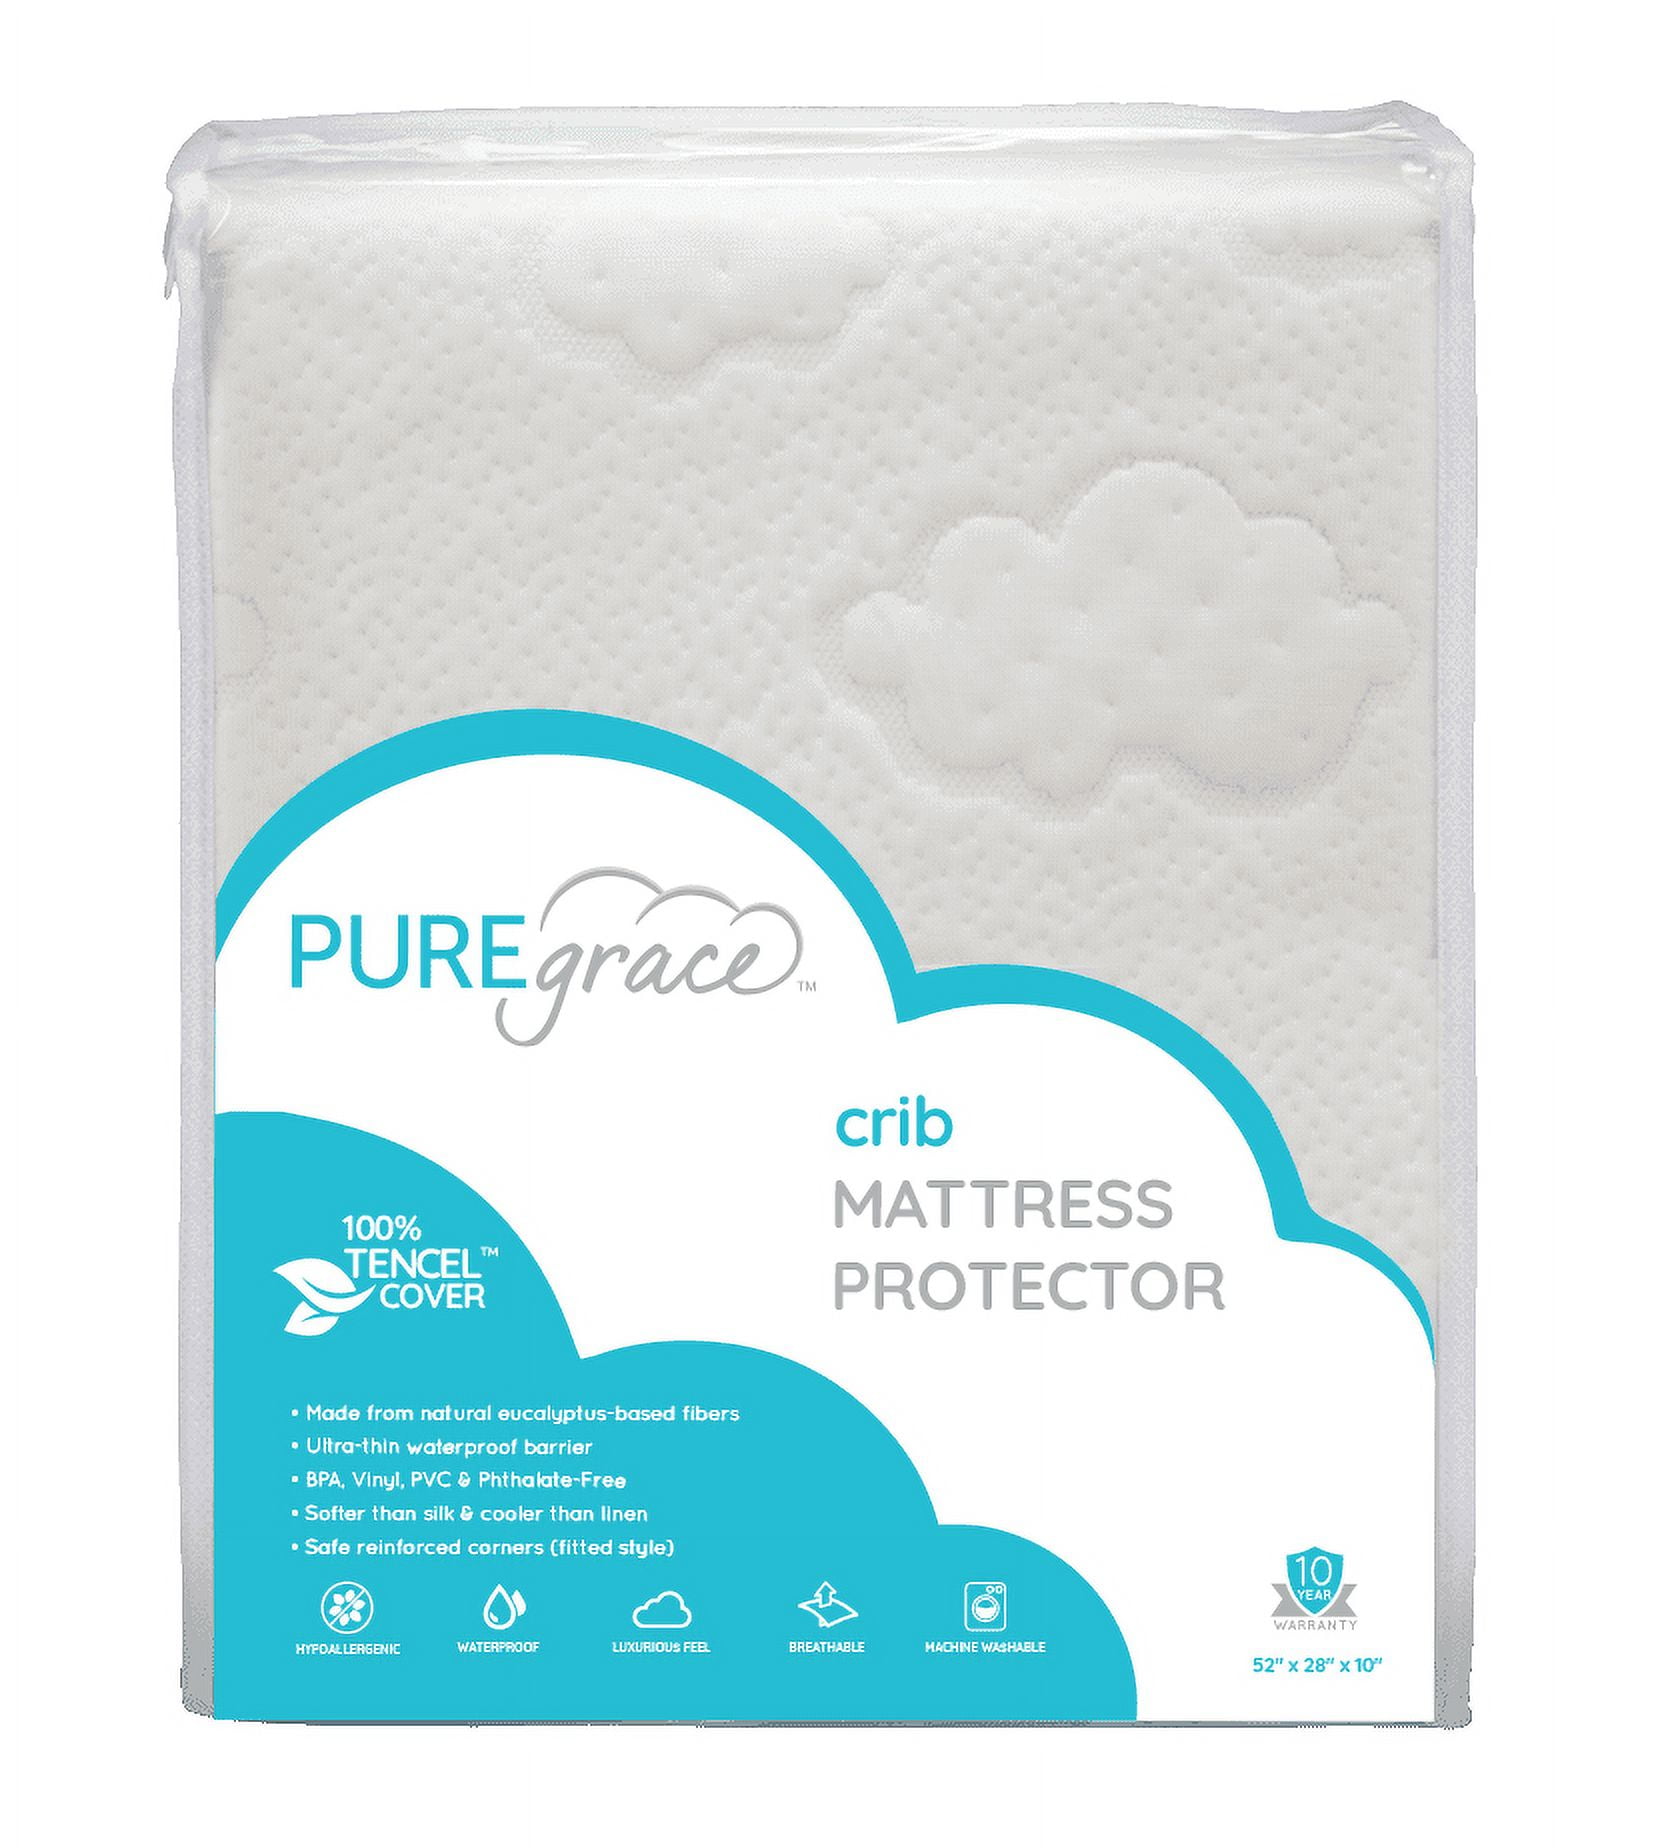 Pure Cotton Baby Waterproof Pad 3 Layer Sandwiched Cotton Baby